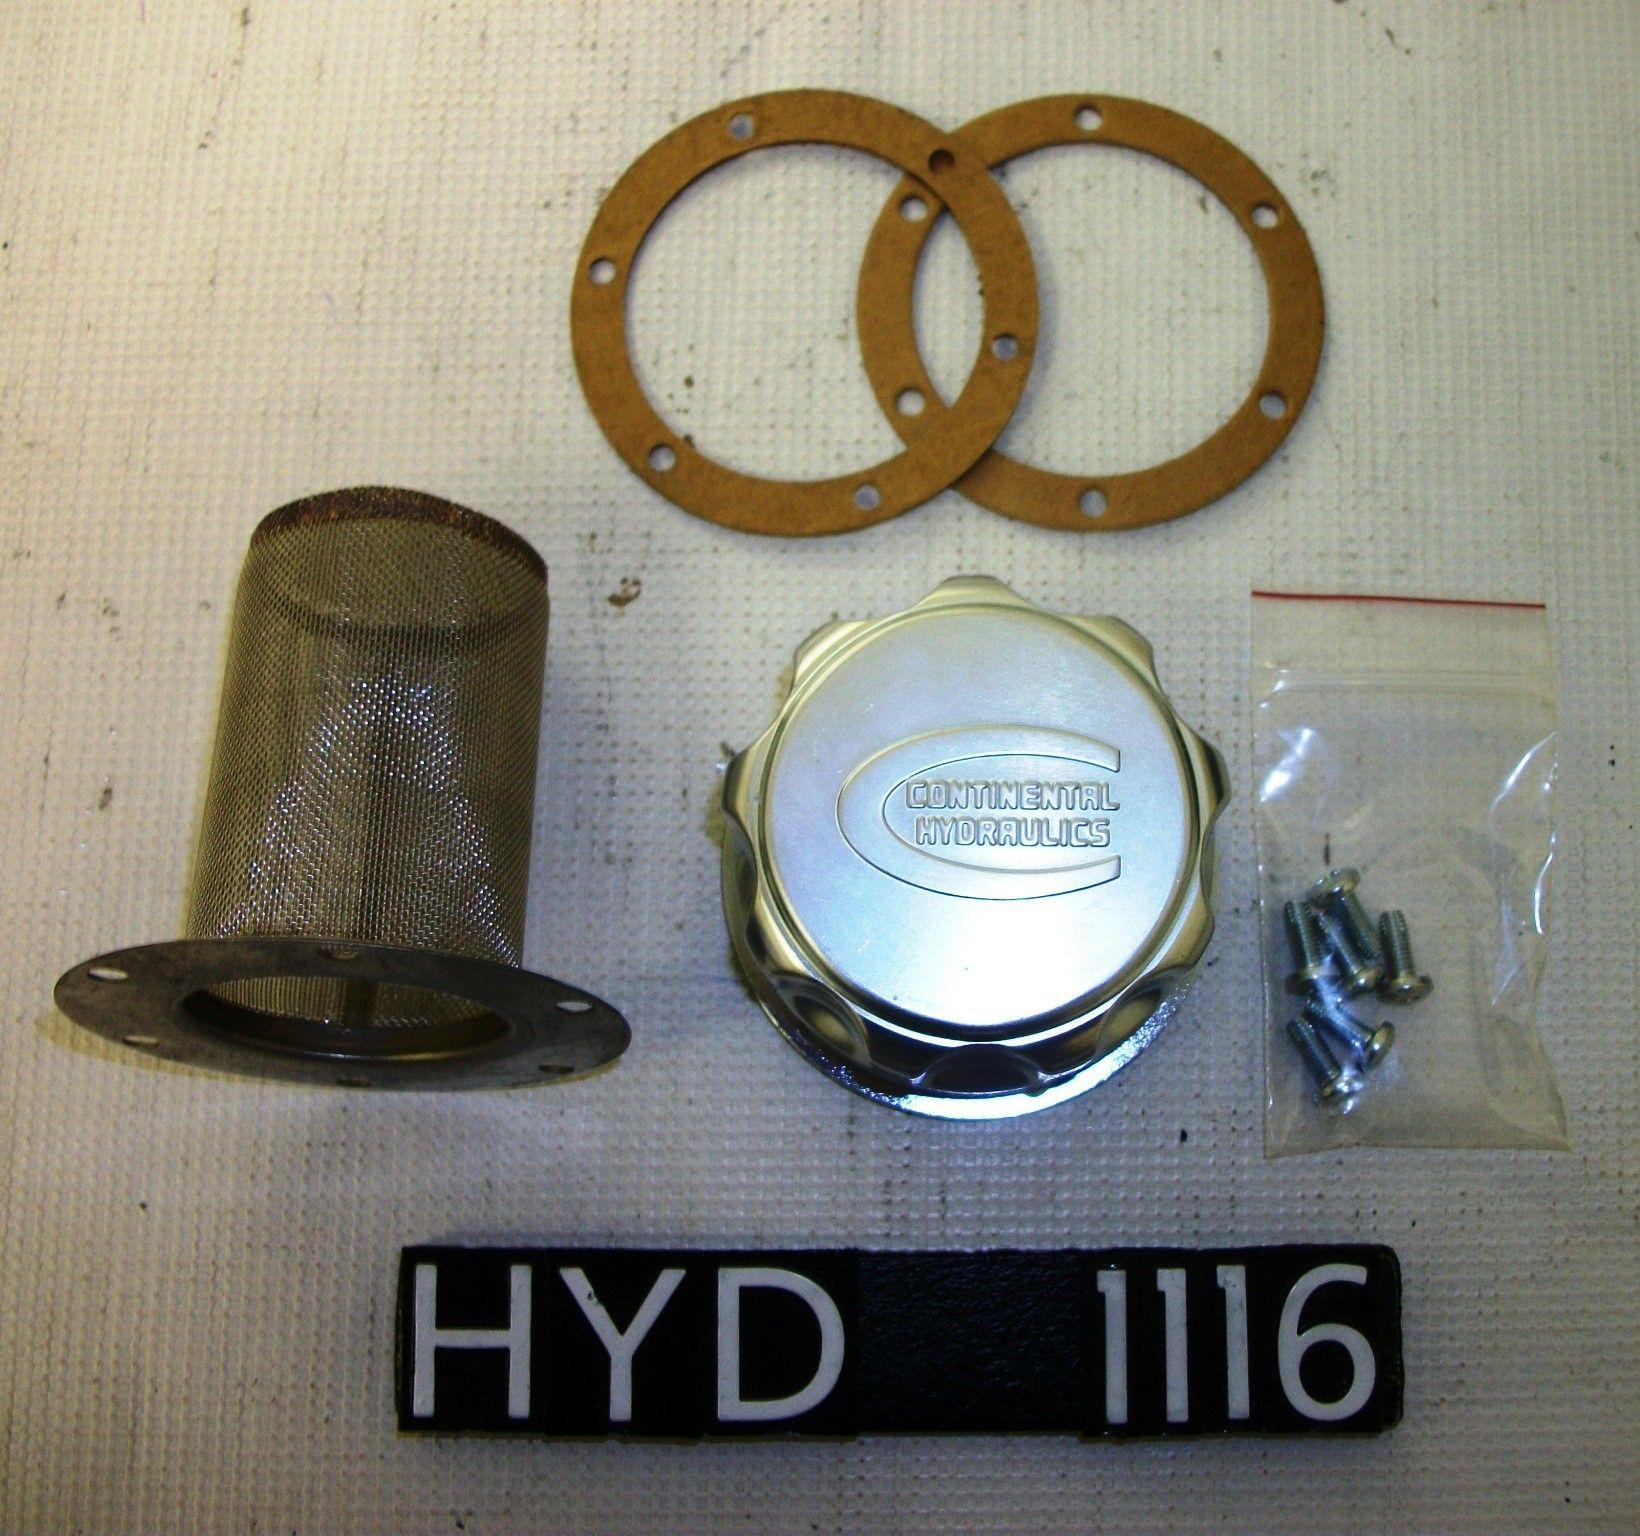 Continental Hydraulic Logo - Used Hydraulic and Pneumatic Devices for Sale - Continental ...